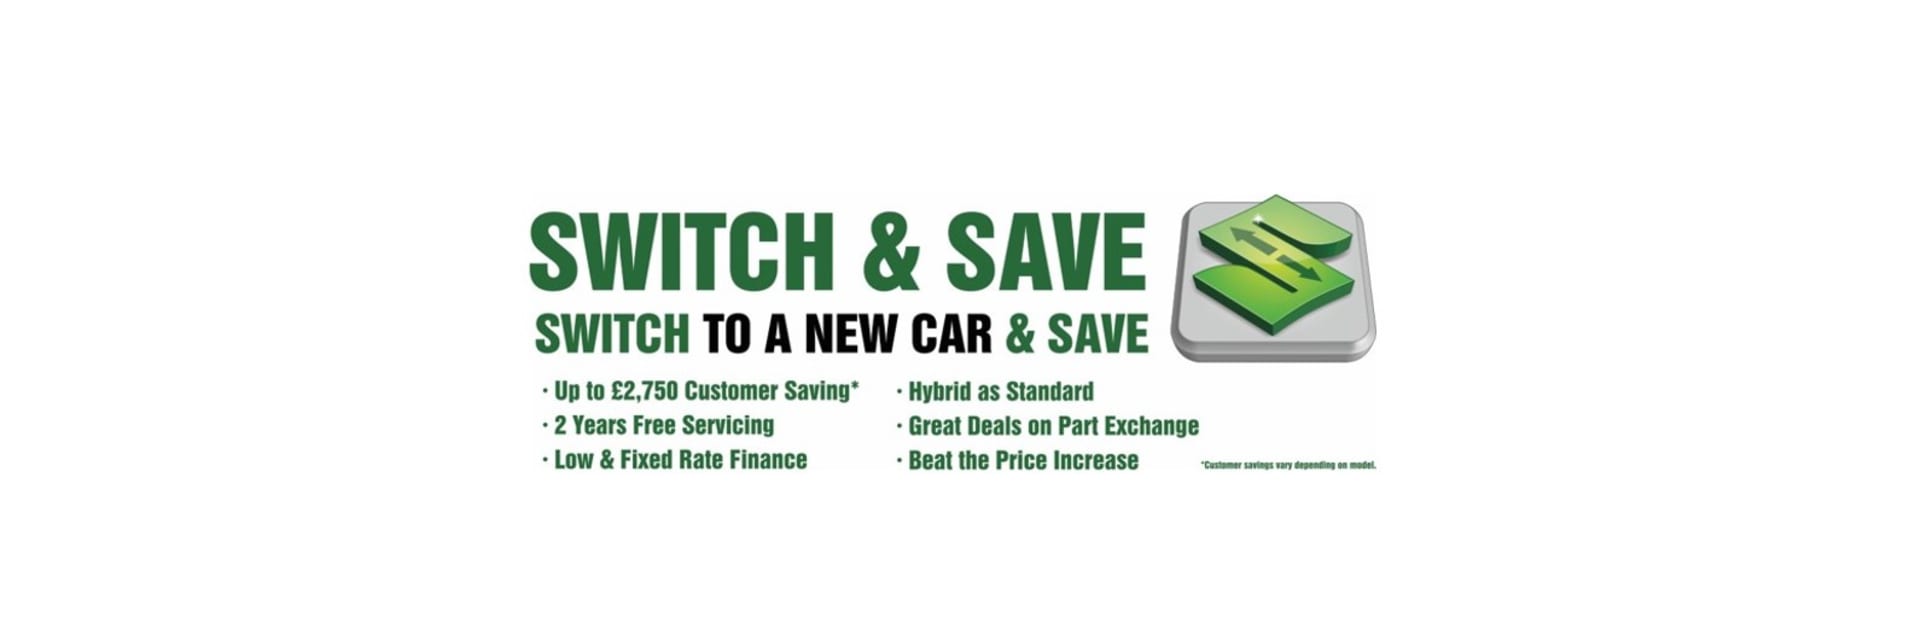 Switch to a new Suzuki car and save